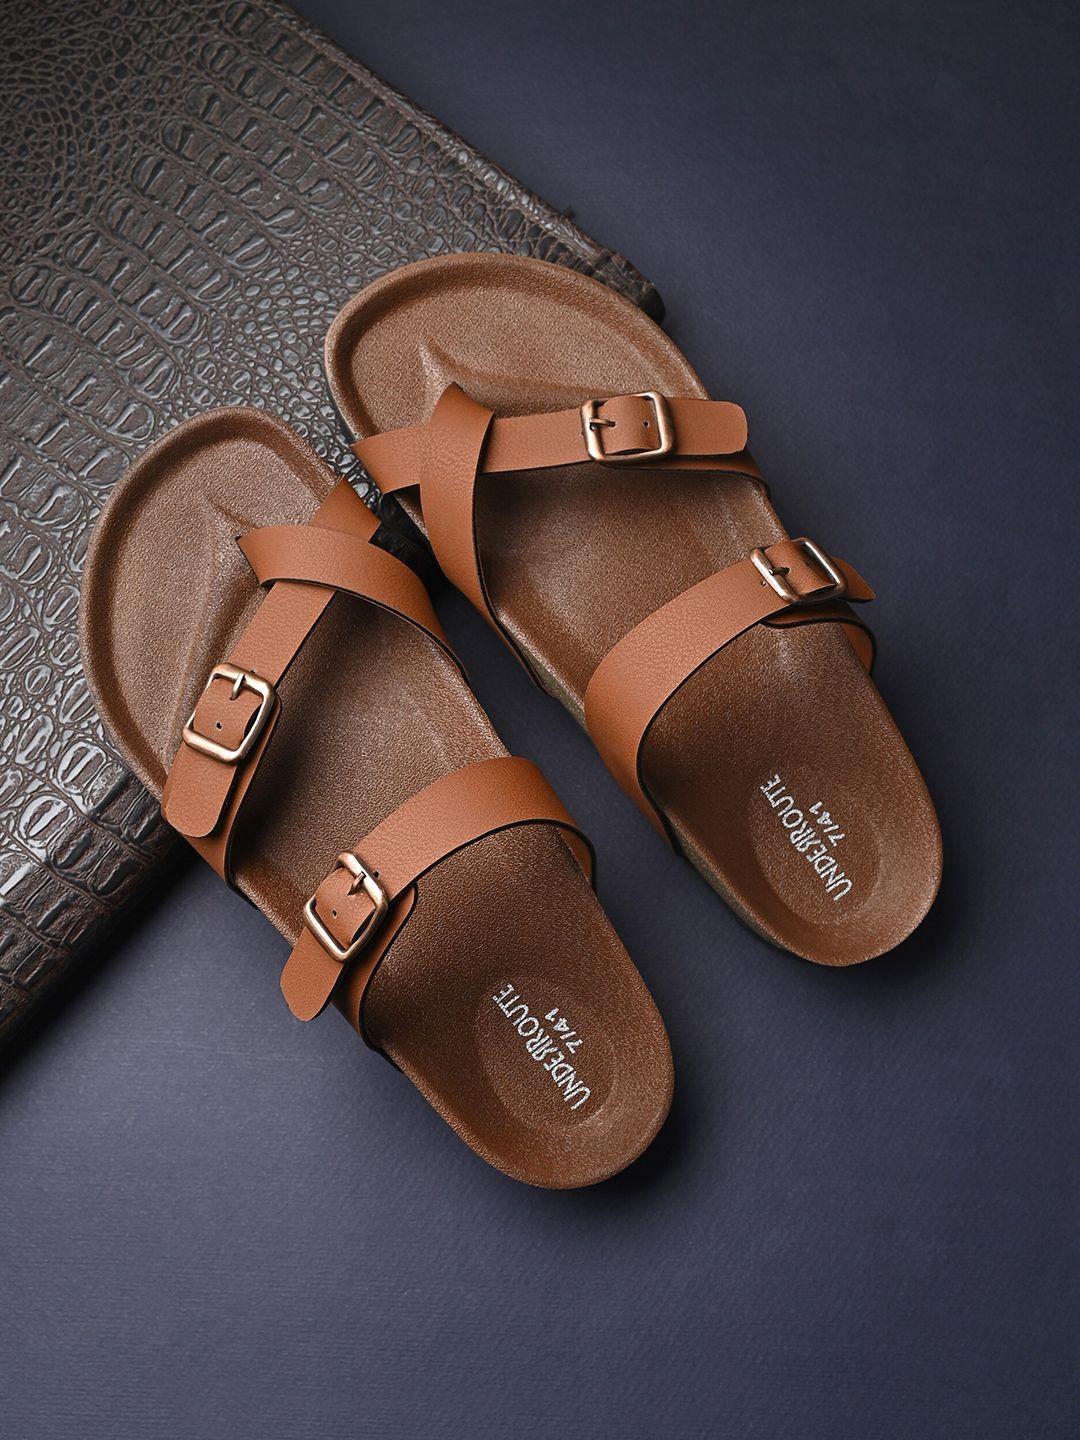 underroute-men-one-toe-two-strap-comfort-sandals-with-buckle-detail